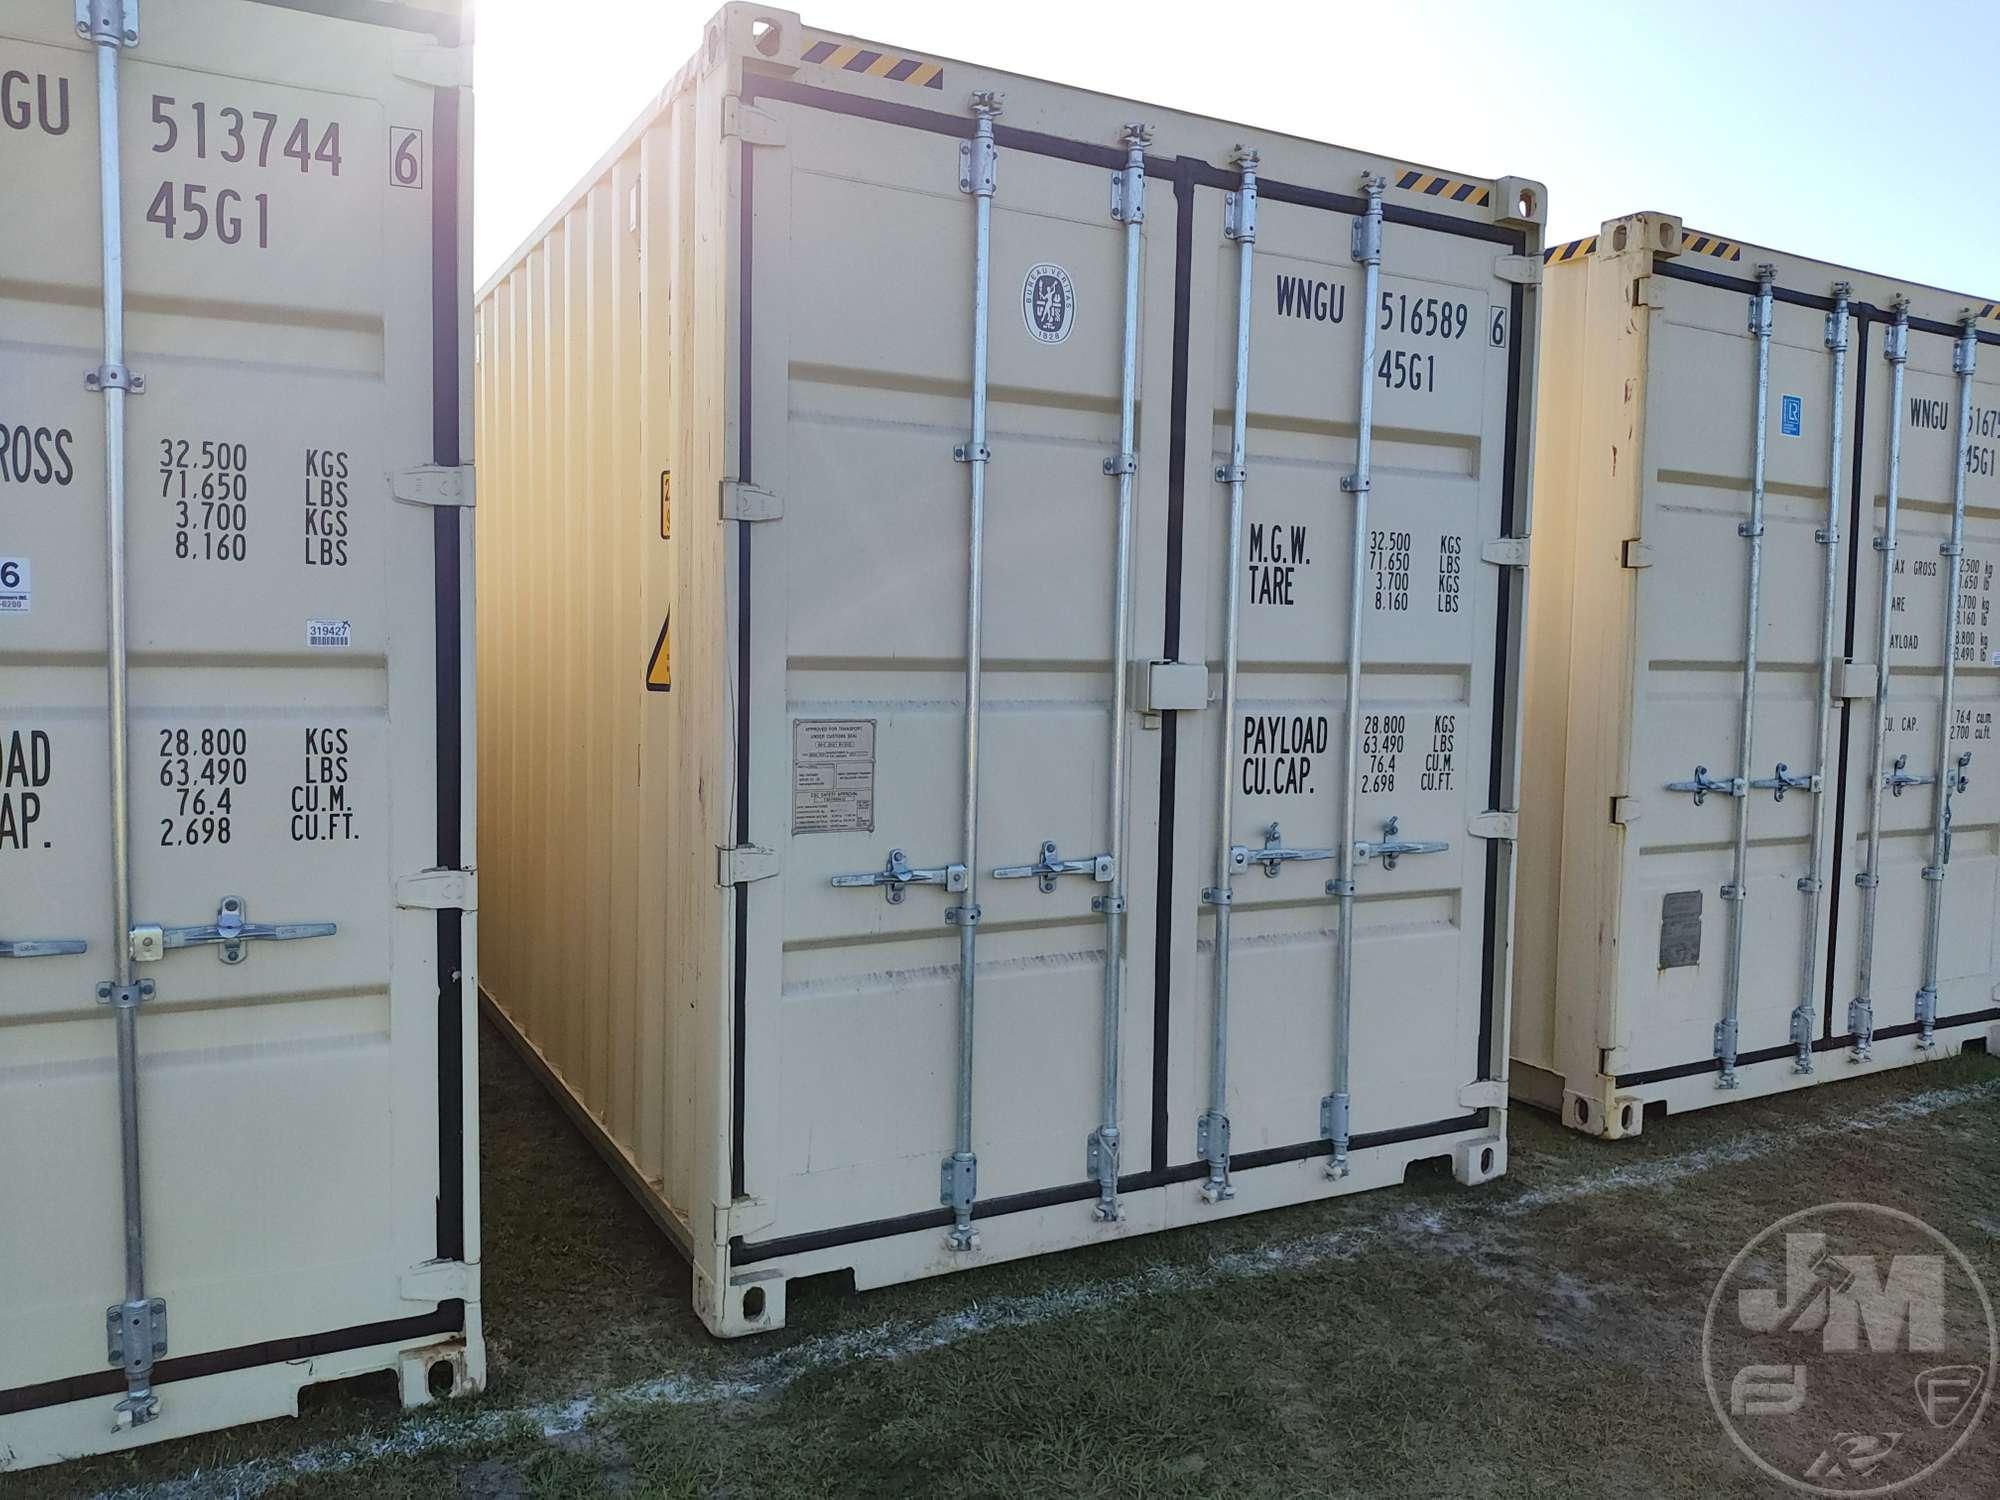 2022 WNG CONTAINER  40' CONTAINER SN: WNGU5165896